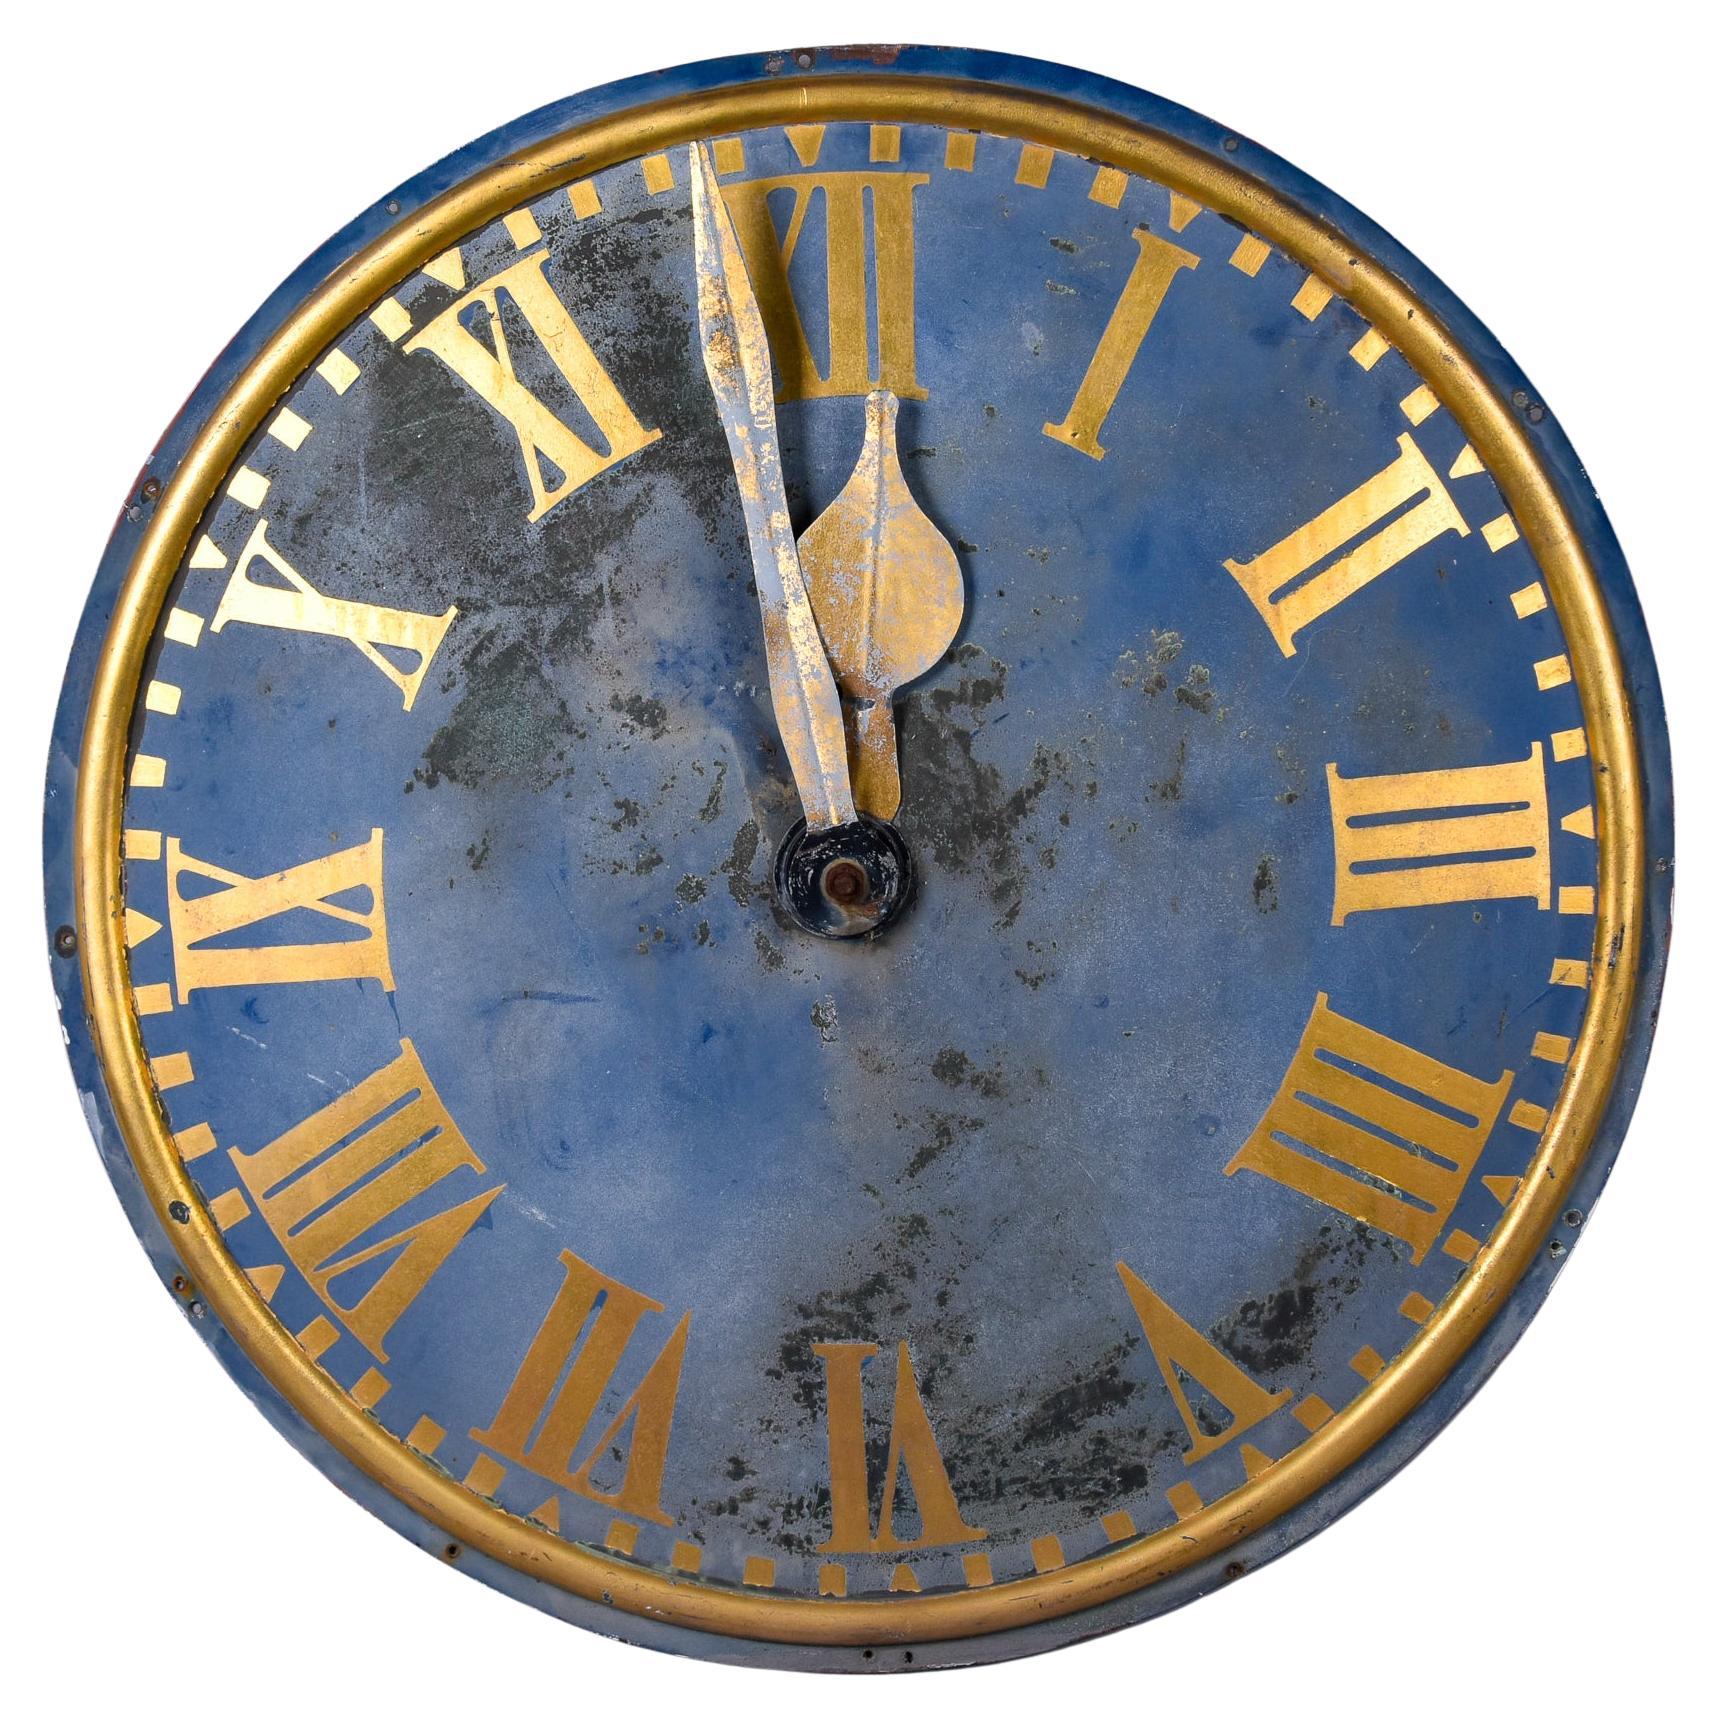 Early 20th C French Antique Round Clock Face For Sale